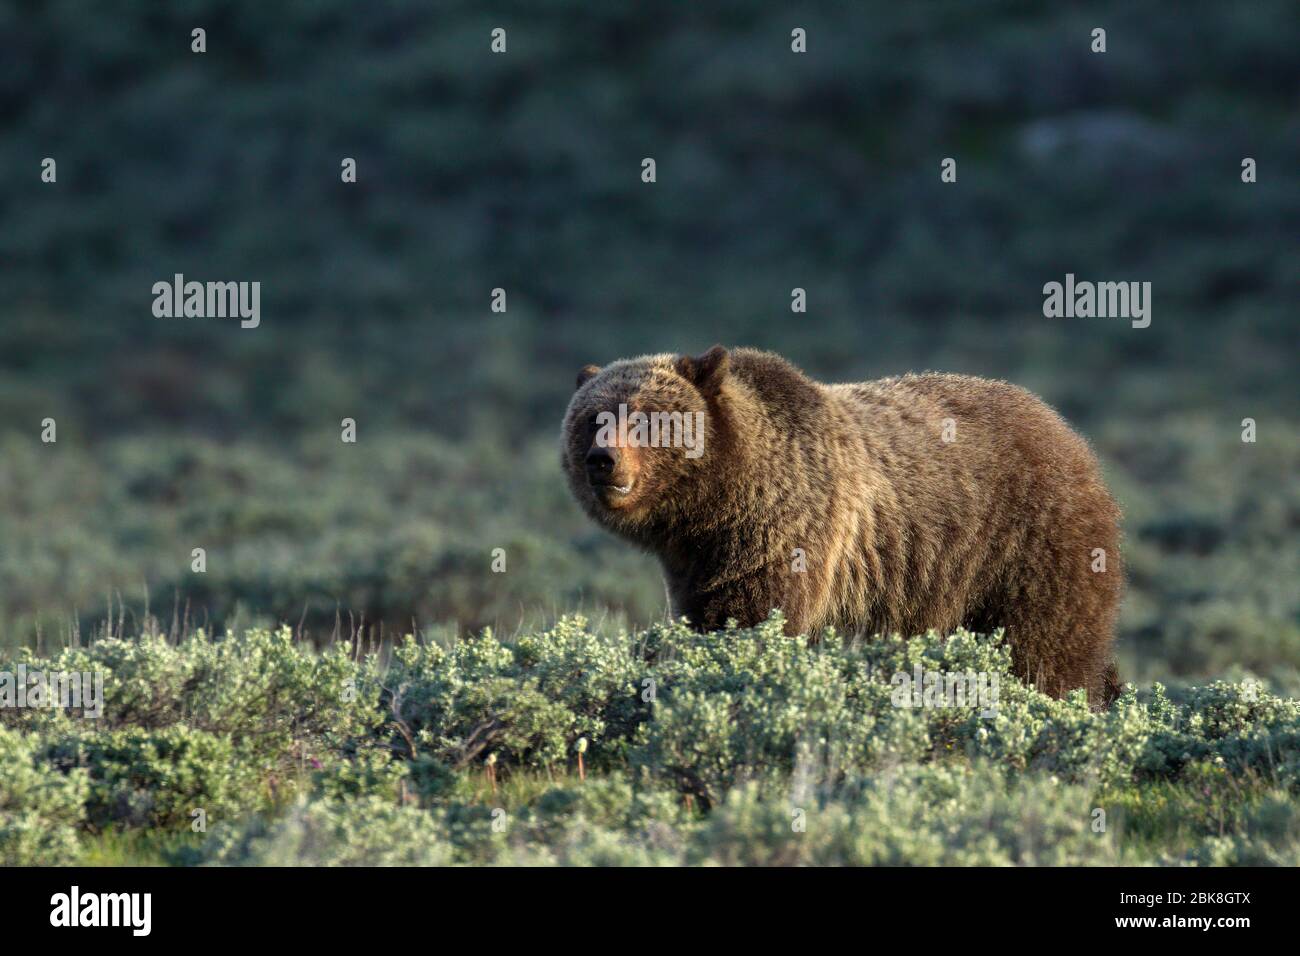 Grizzly bear in  Yellowstone National Park, Wyoming Stock Photo